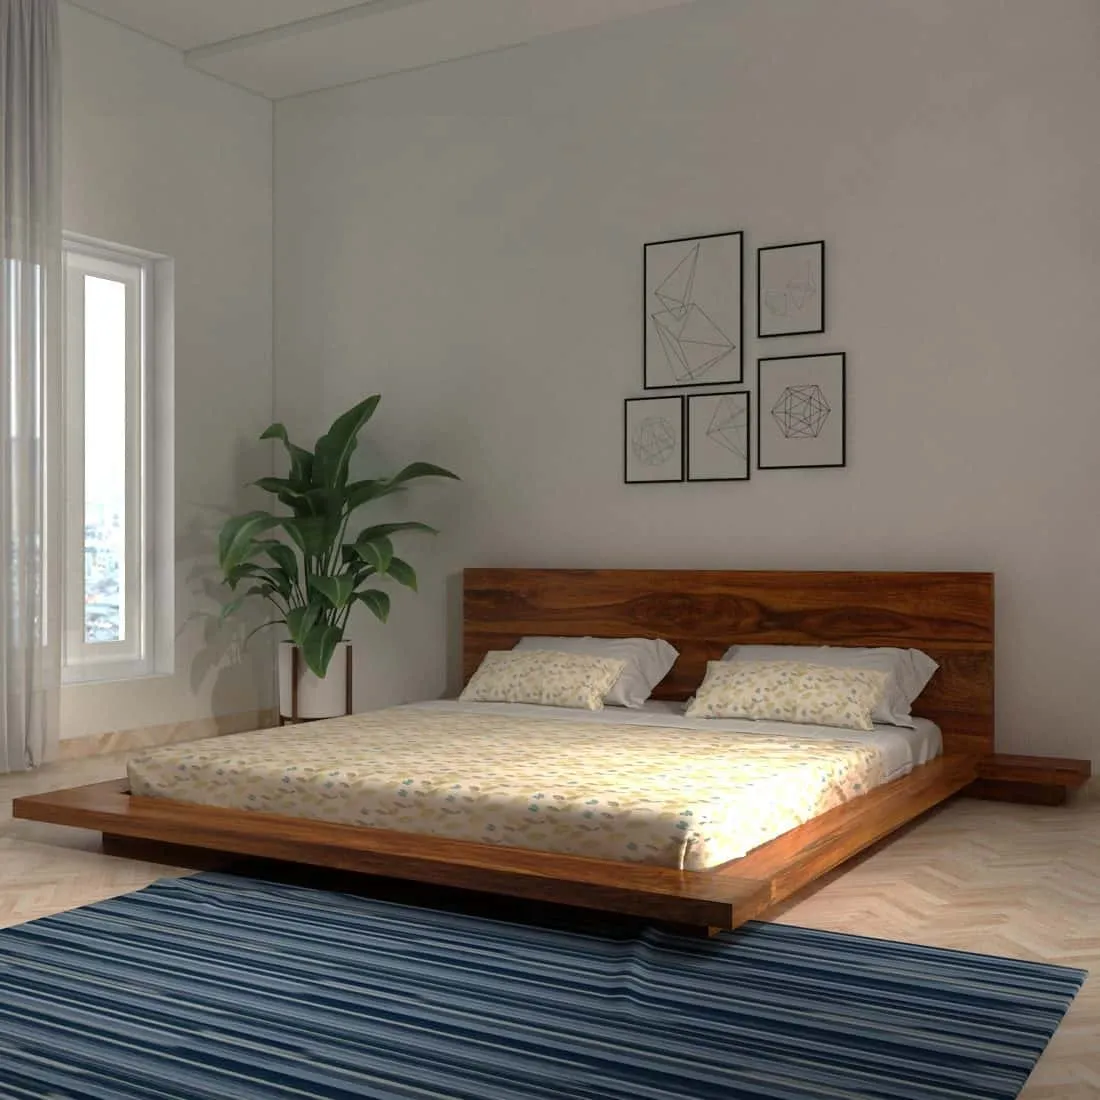 wooden frame platform double size bed design p،to at affordable price, indoor green plant, white walls, pillows and mattress, blue rug